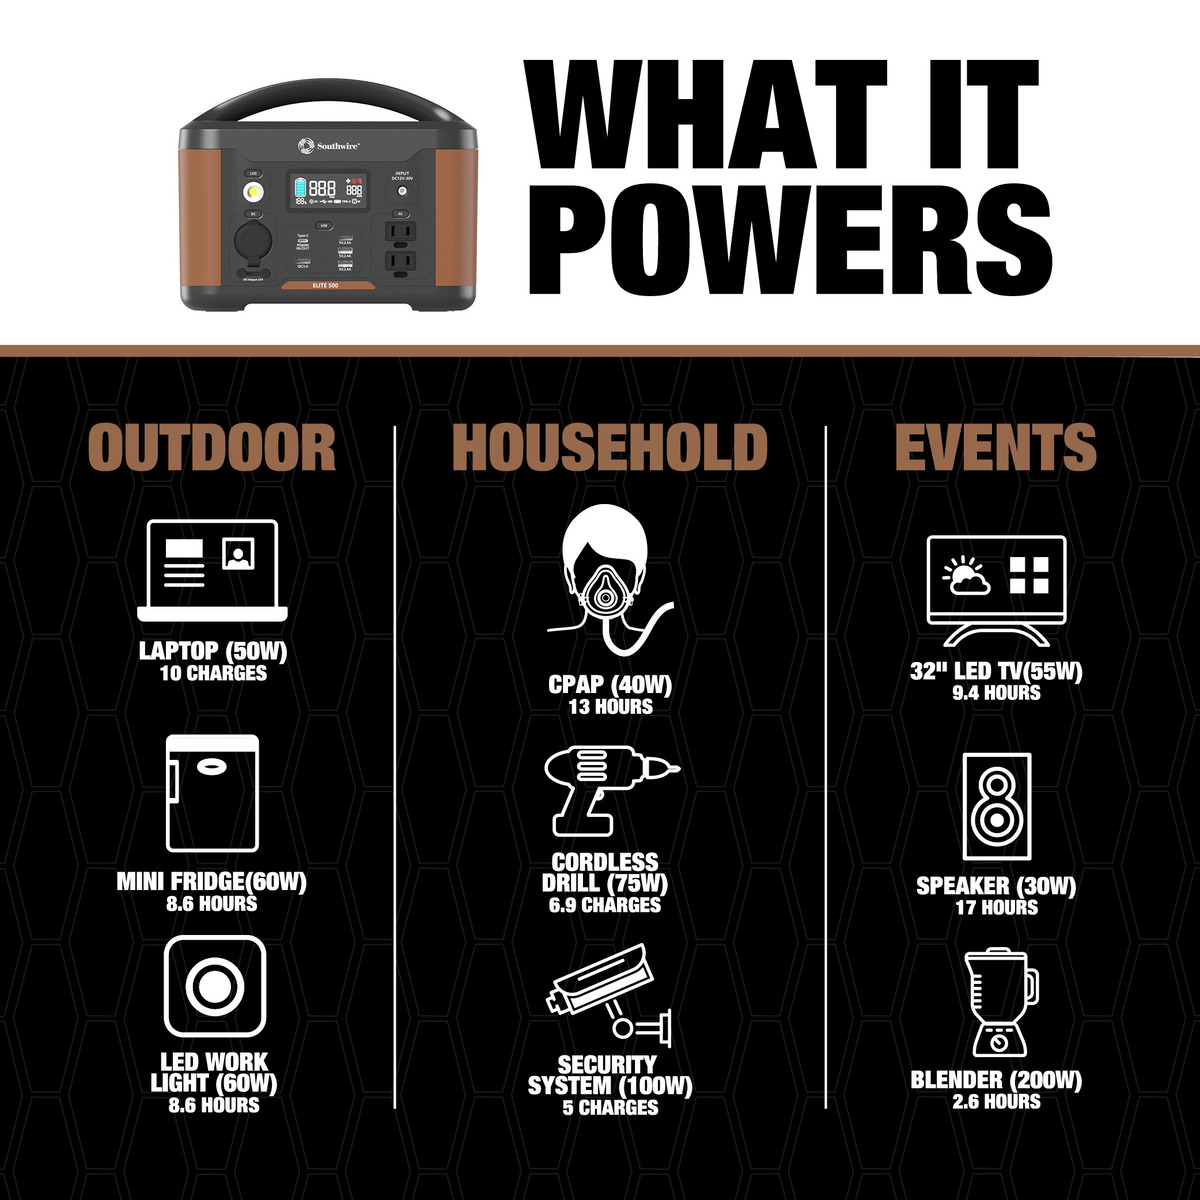 Southwire Elite 500 Series™ Portable Power Station